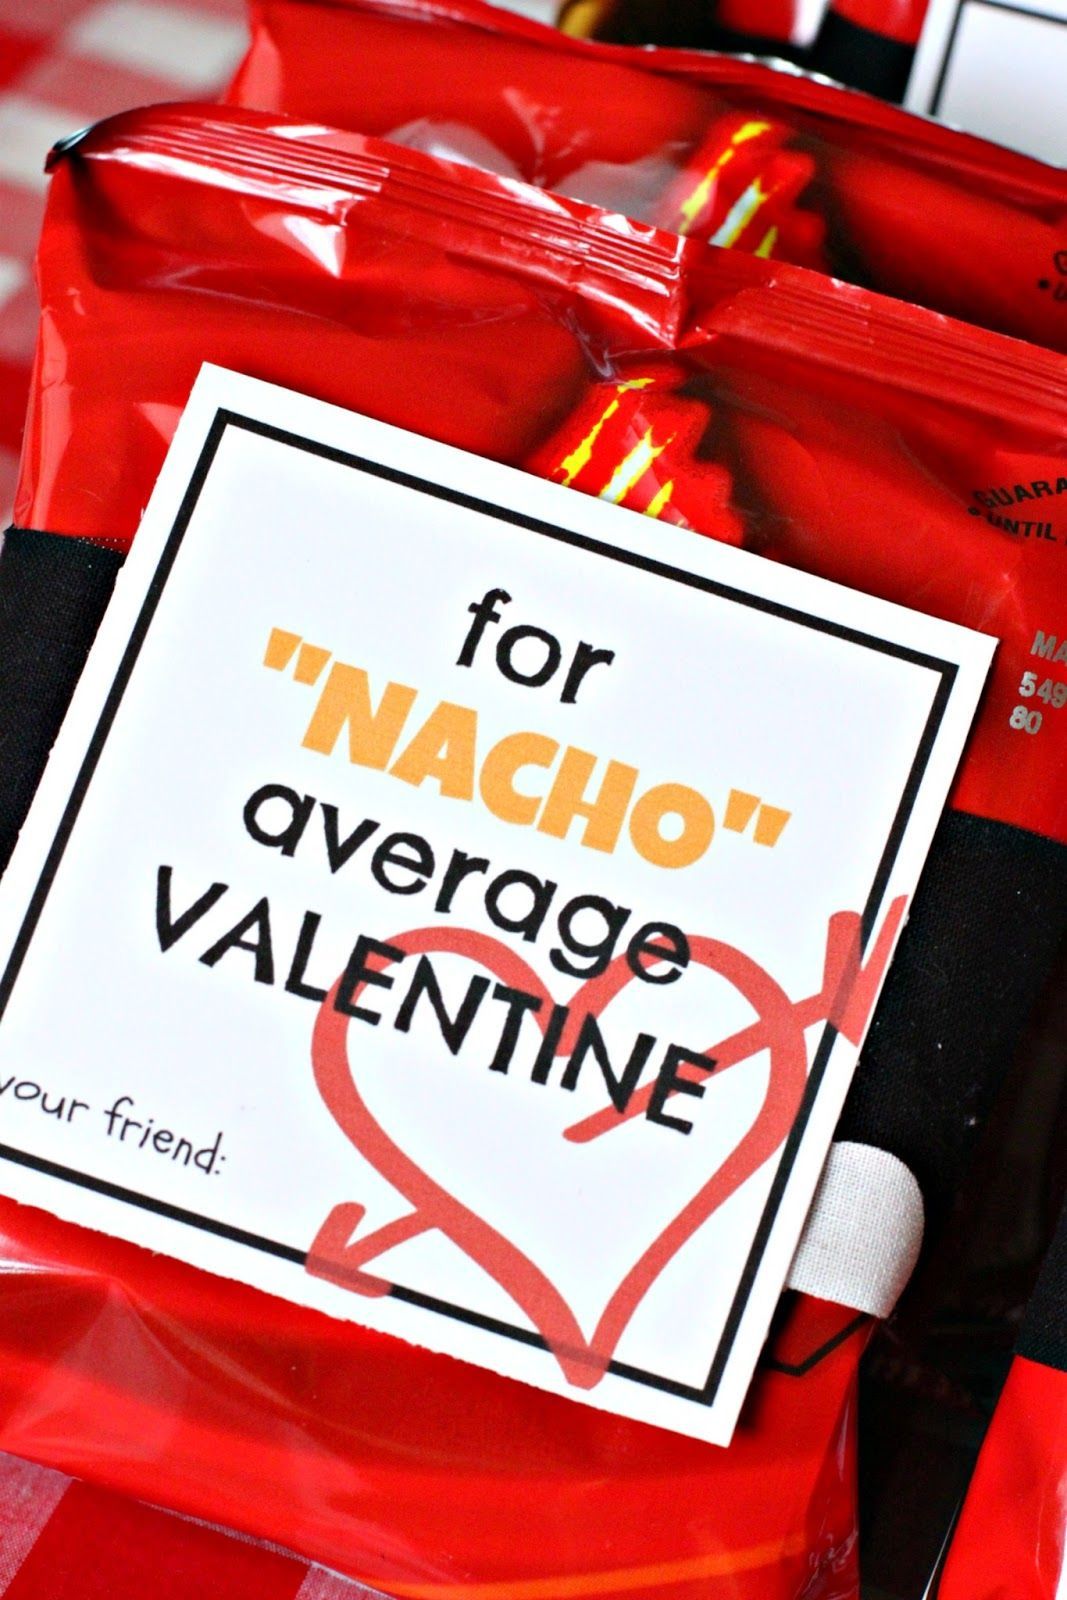 Does your Valentine love nachos? Maybe attach this to a plate of nachos!